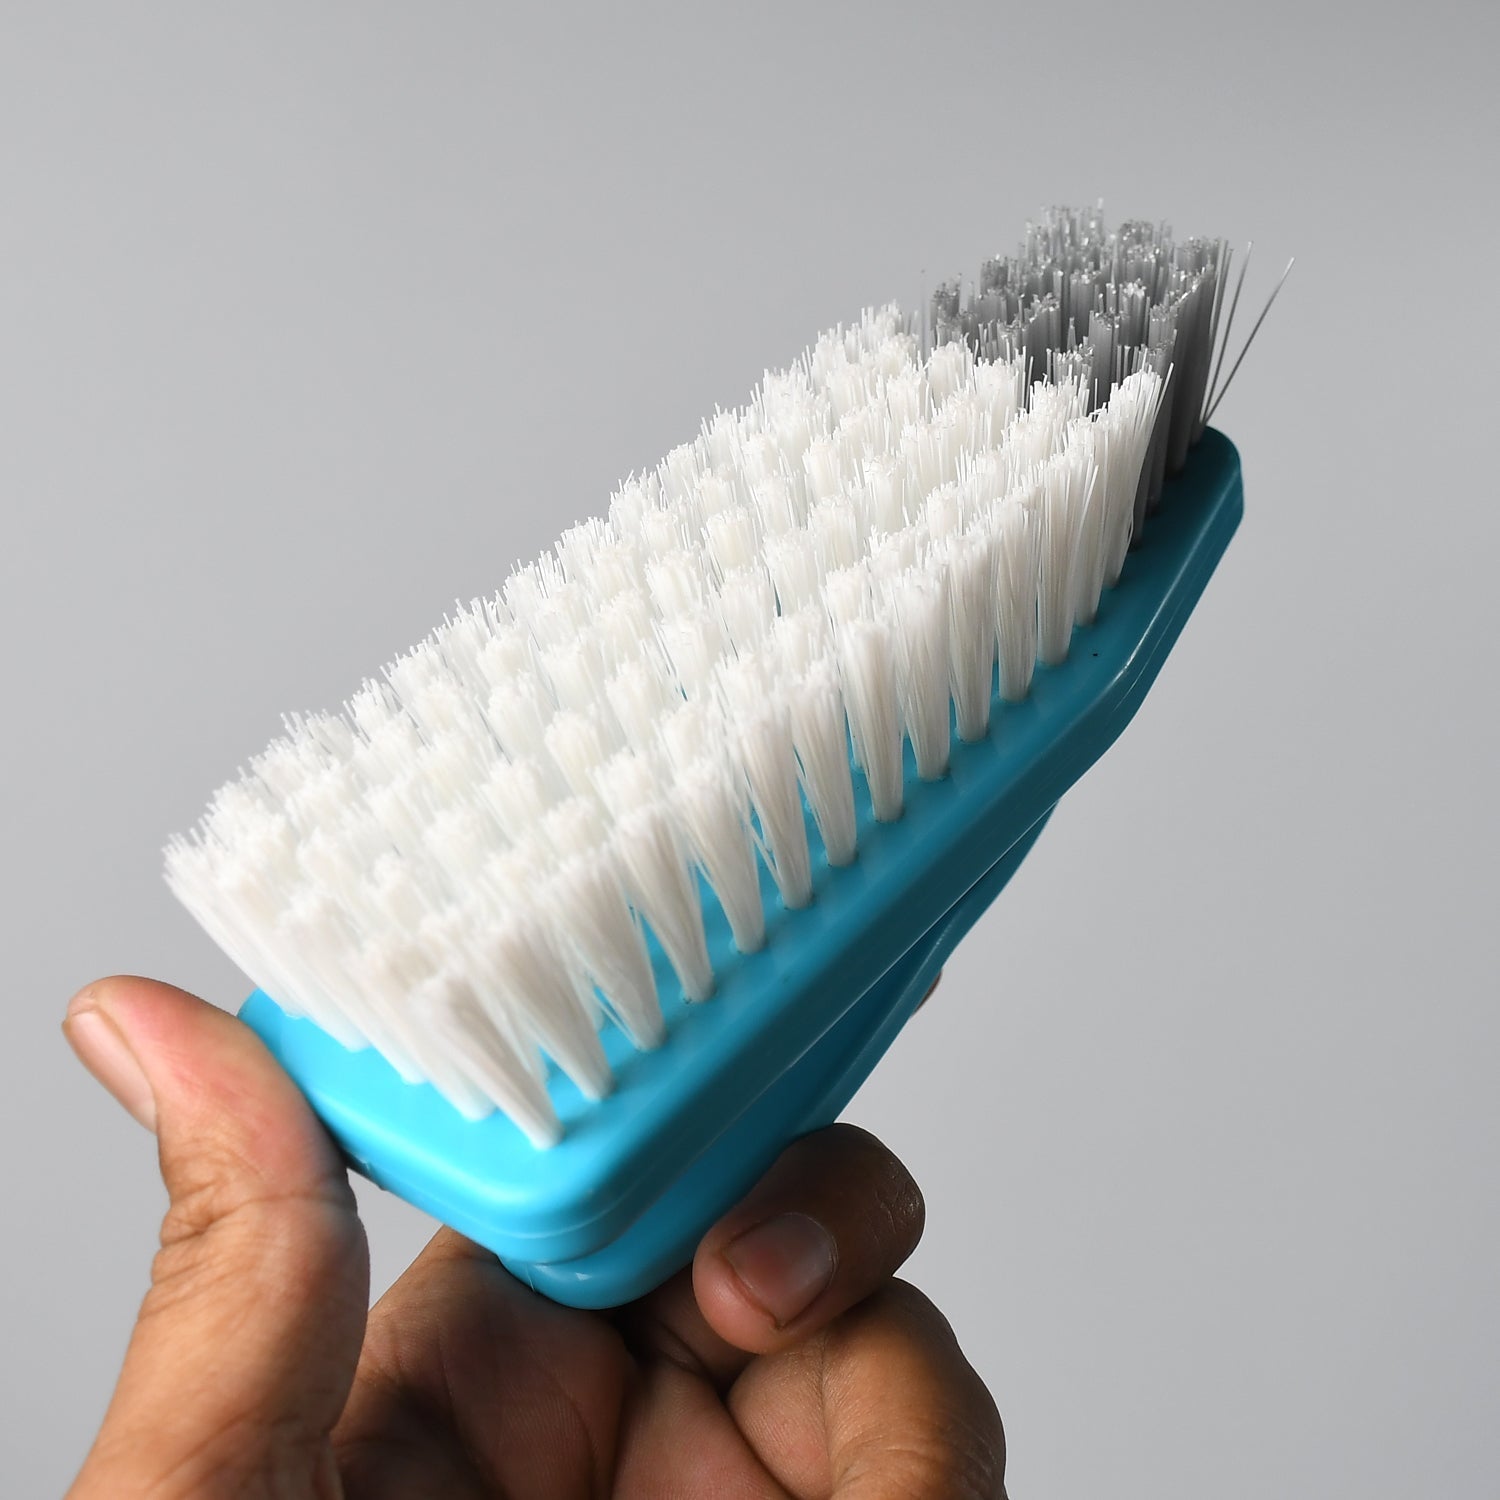 7527 MULTIPURPOSE DURABLE CLEANING BRUSH WITH HANDLE FOR CLOTHES LAUNDRY FLOOR TILES AT HOME KITCHEN SINK, WET AND DRY WASH CLOTH SPOTTING WASHING SCRUBBING BRUSH. 